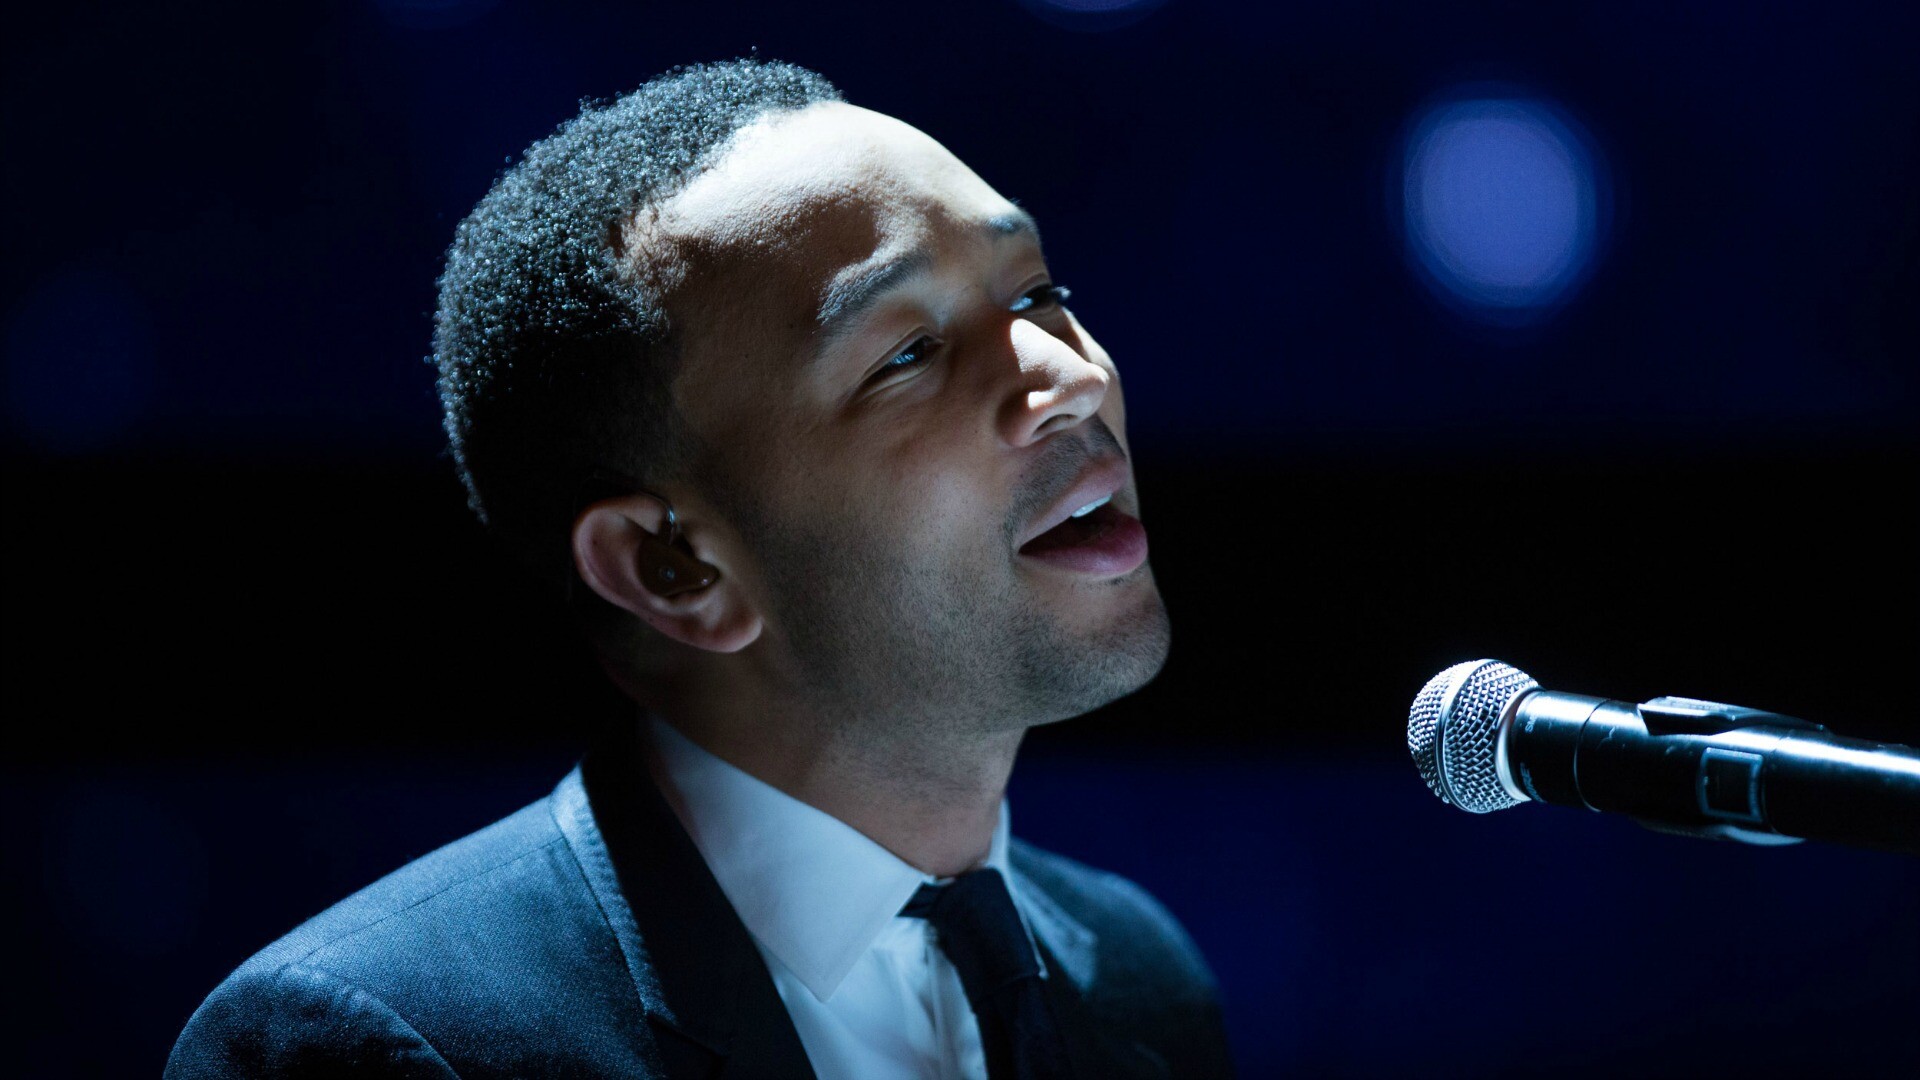 John Legend: The second studio album, Once Again, was released on October 24, 2006. 1920x1080 Full HD Wallpaper.